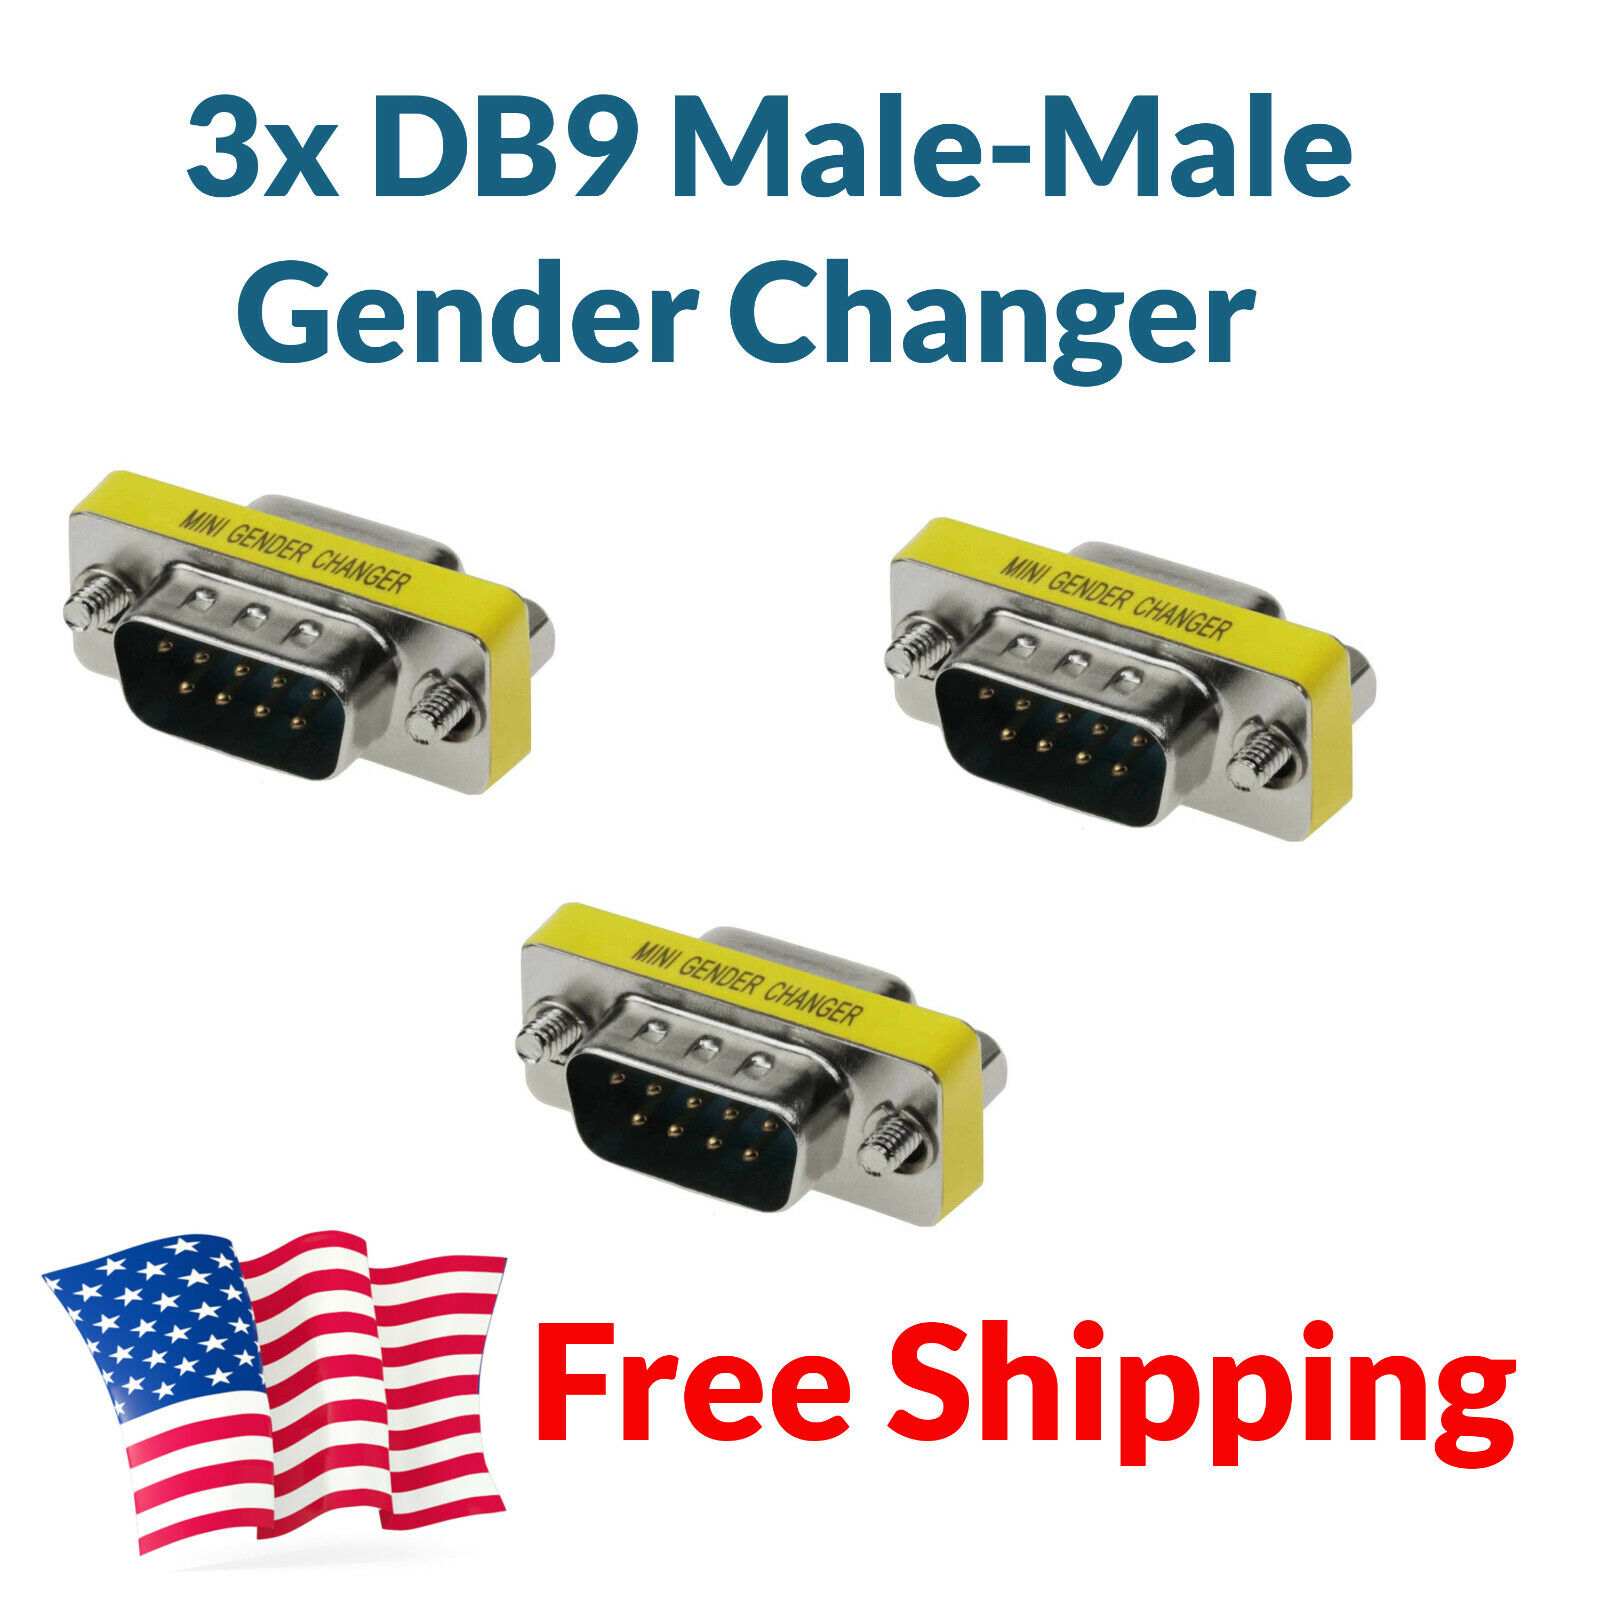 3x DB9 Gender Changer Adapter Male MM M-M M/M RS-232 Male-Male RS232 D-Sub 9 Pin